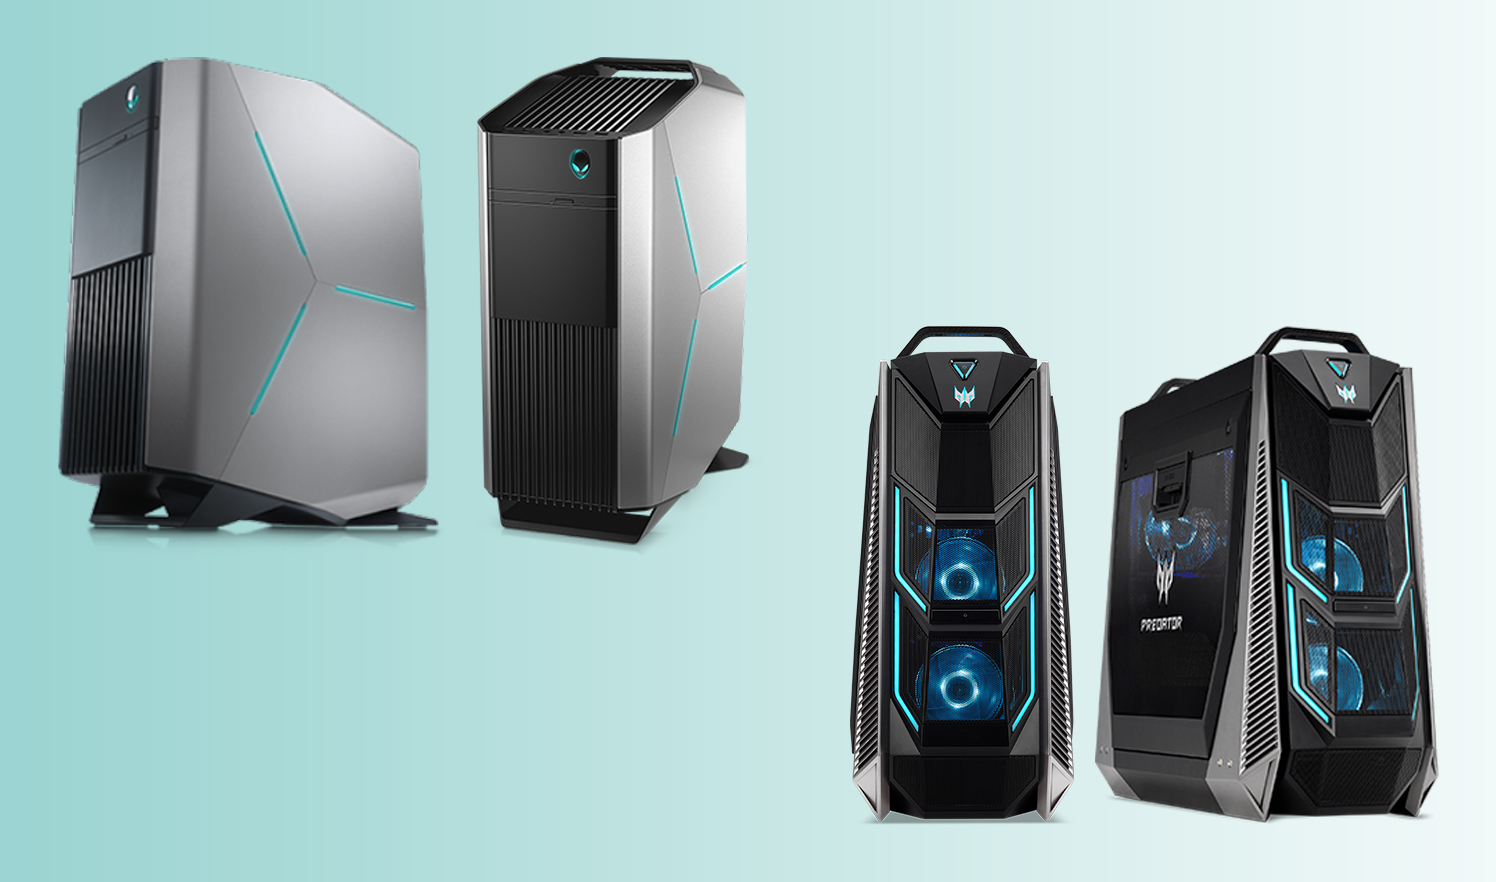  Best Gaming Pc 2021 Budget for Small Bedroom